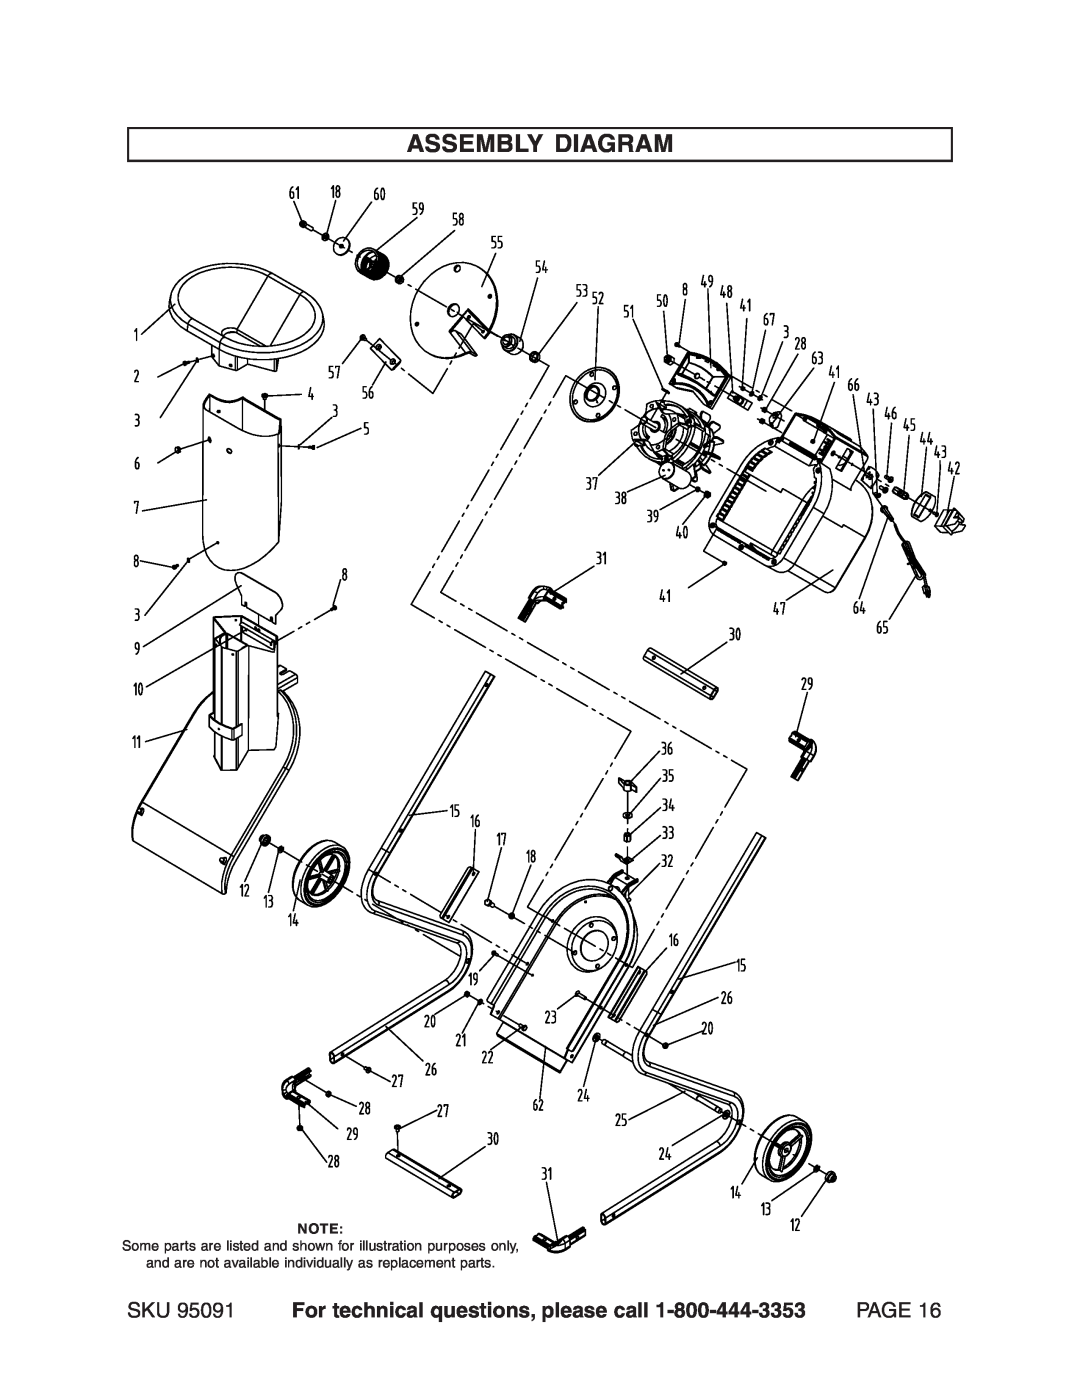 Harbor Freight Tools 95091 manual Assembly Diagram, For technical questions, please call, Page 